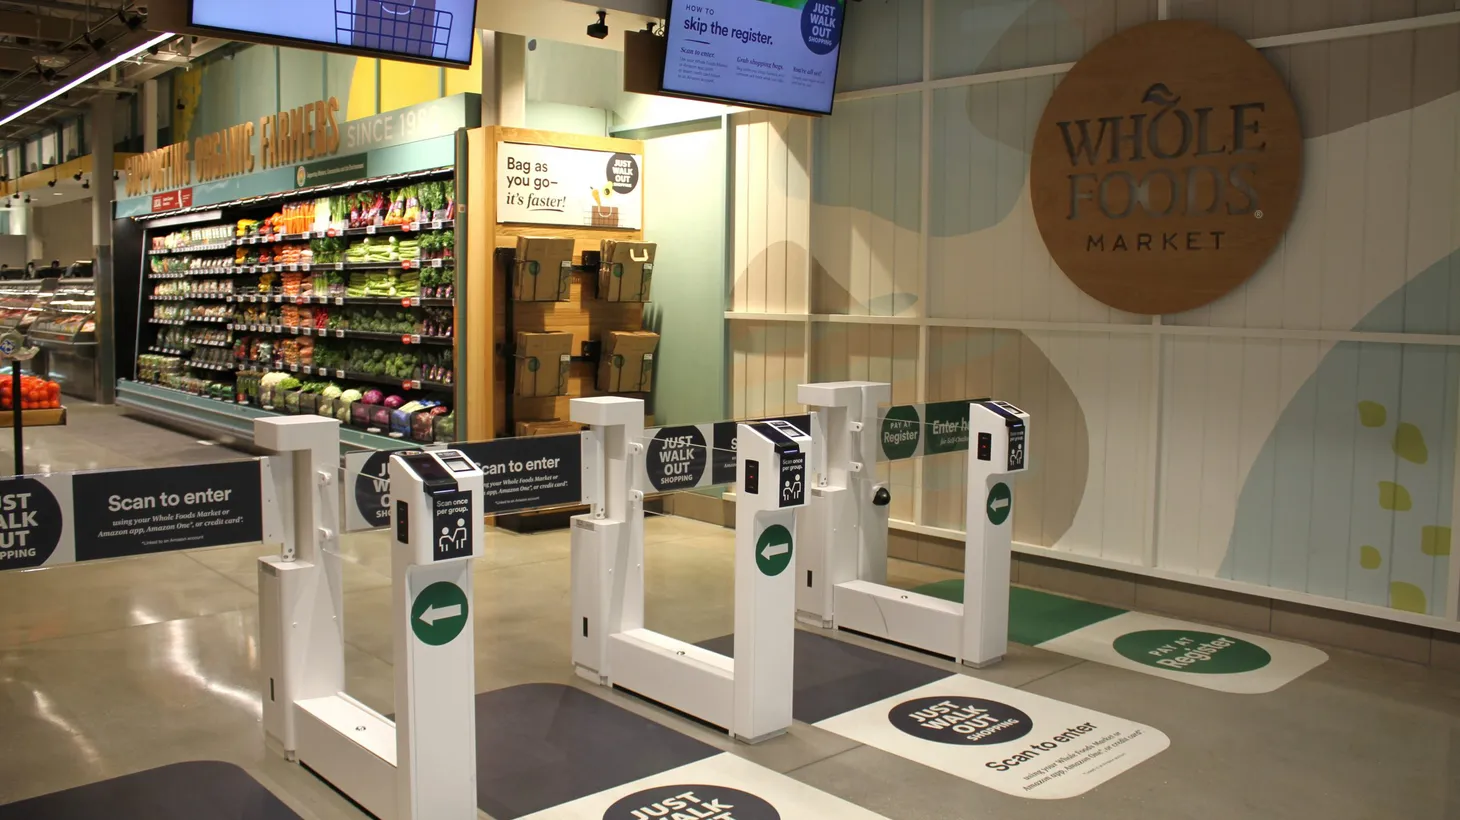 At the entrance of Whole Foods in Sherman Oaks, customers scan a QR code or their palm to begin shopping.